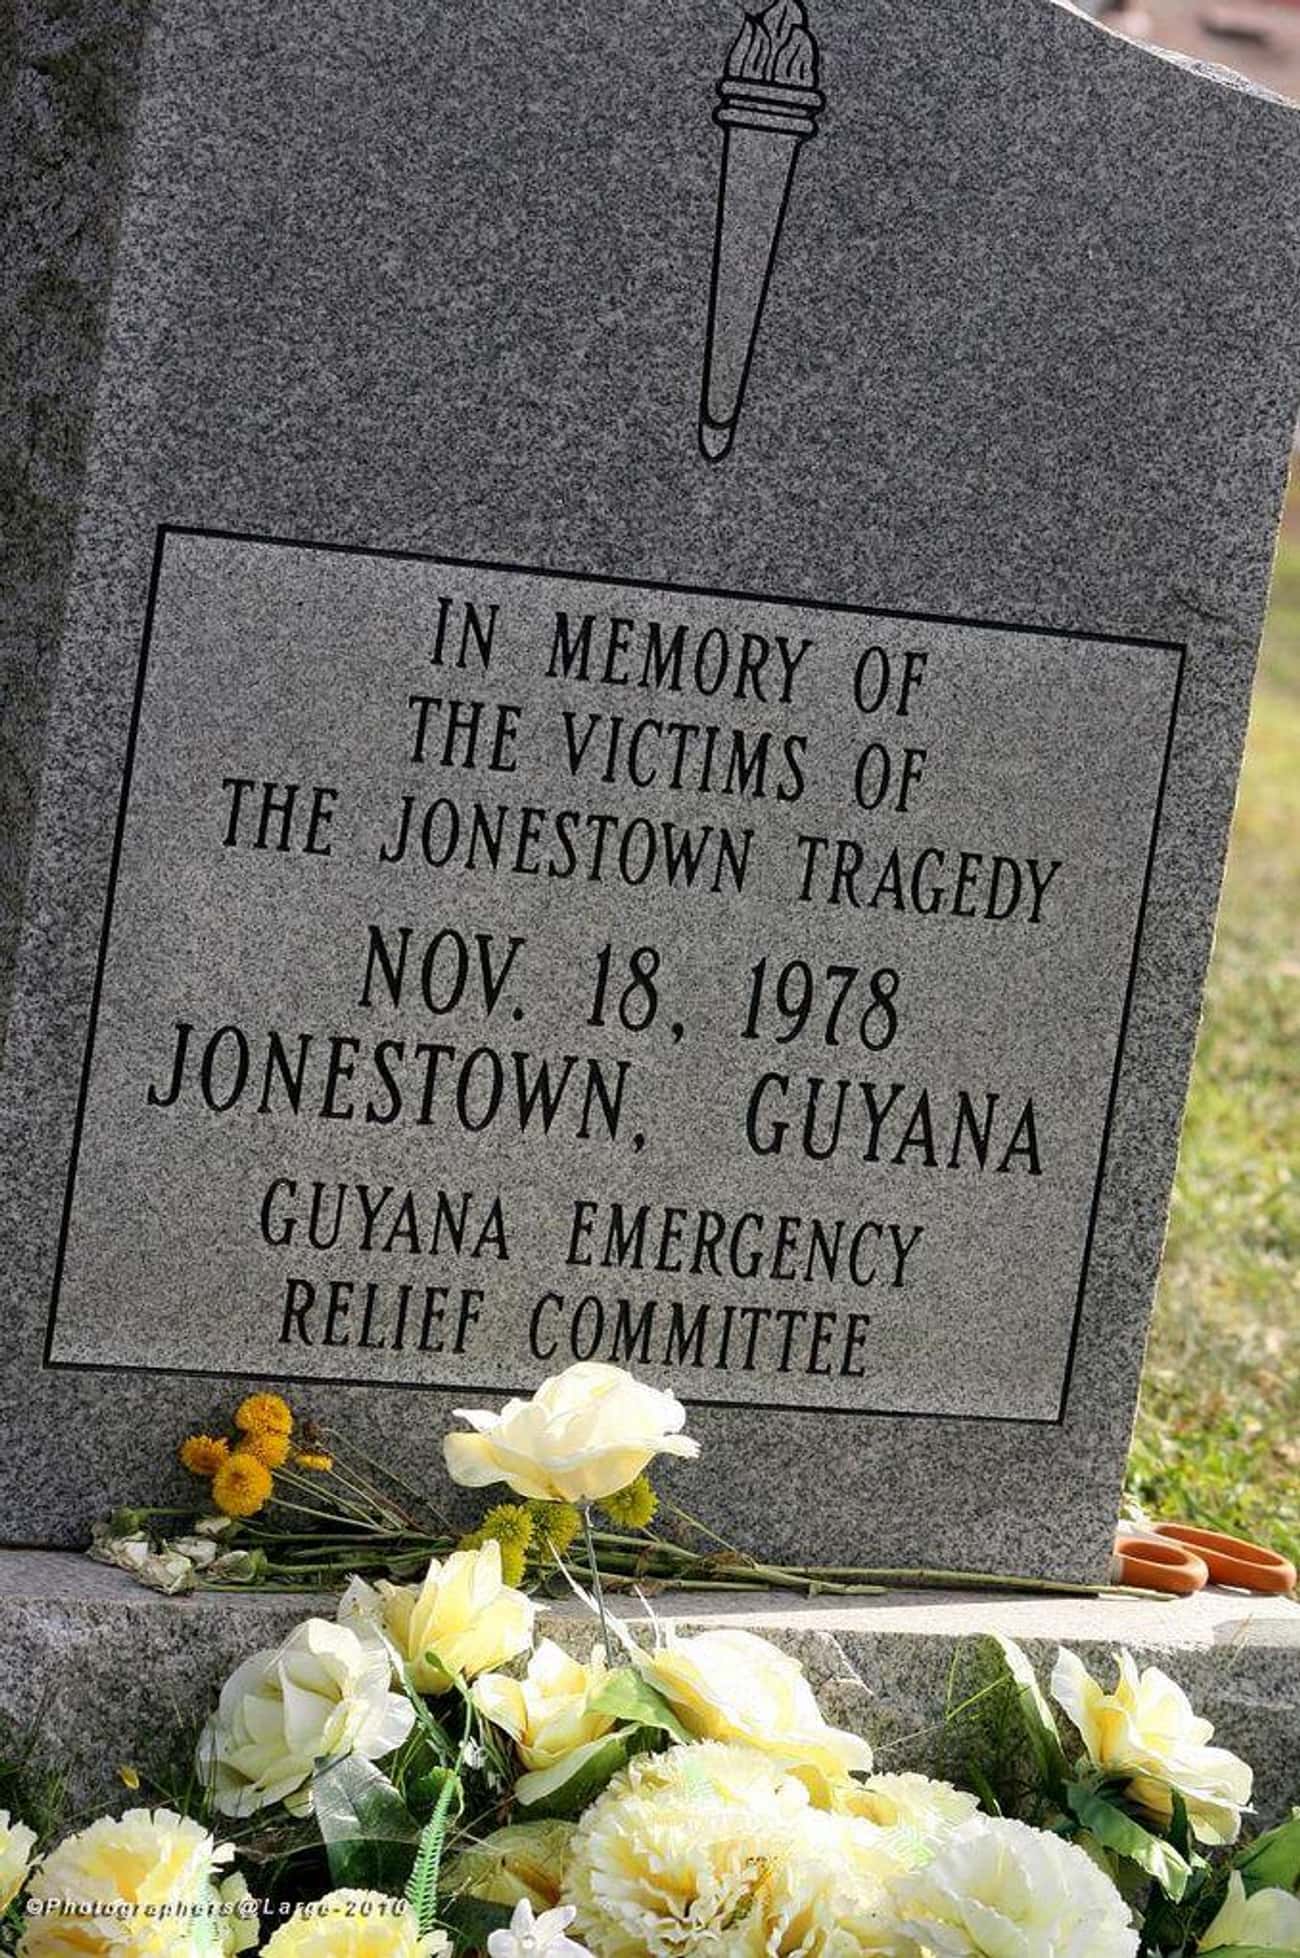 Five People Died Trying To Help Jonestown Residents Escape